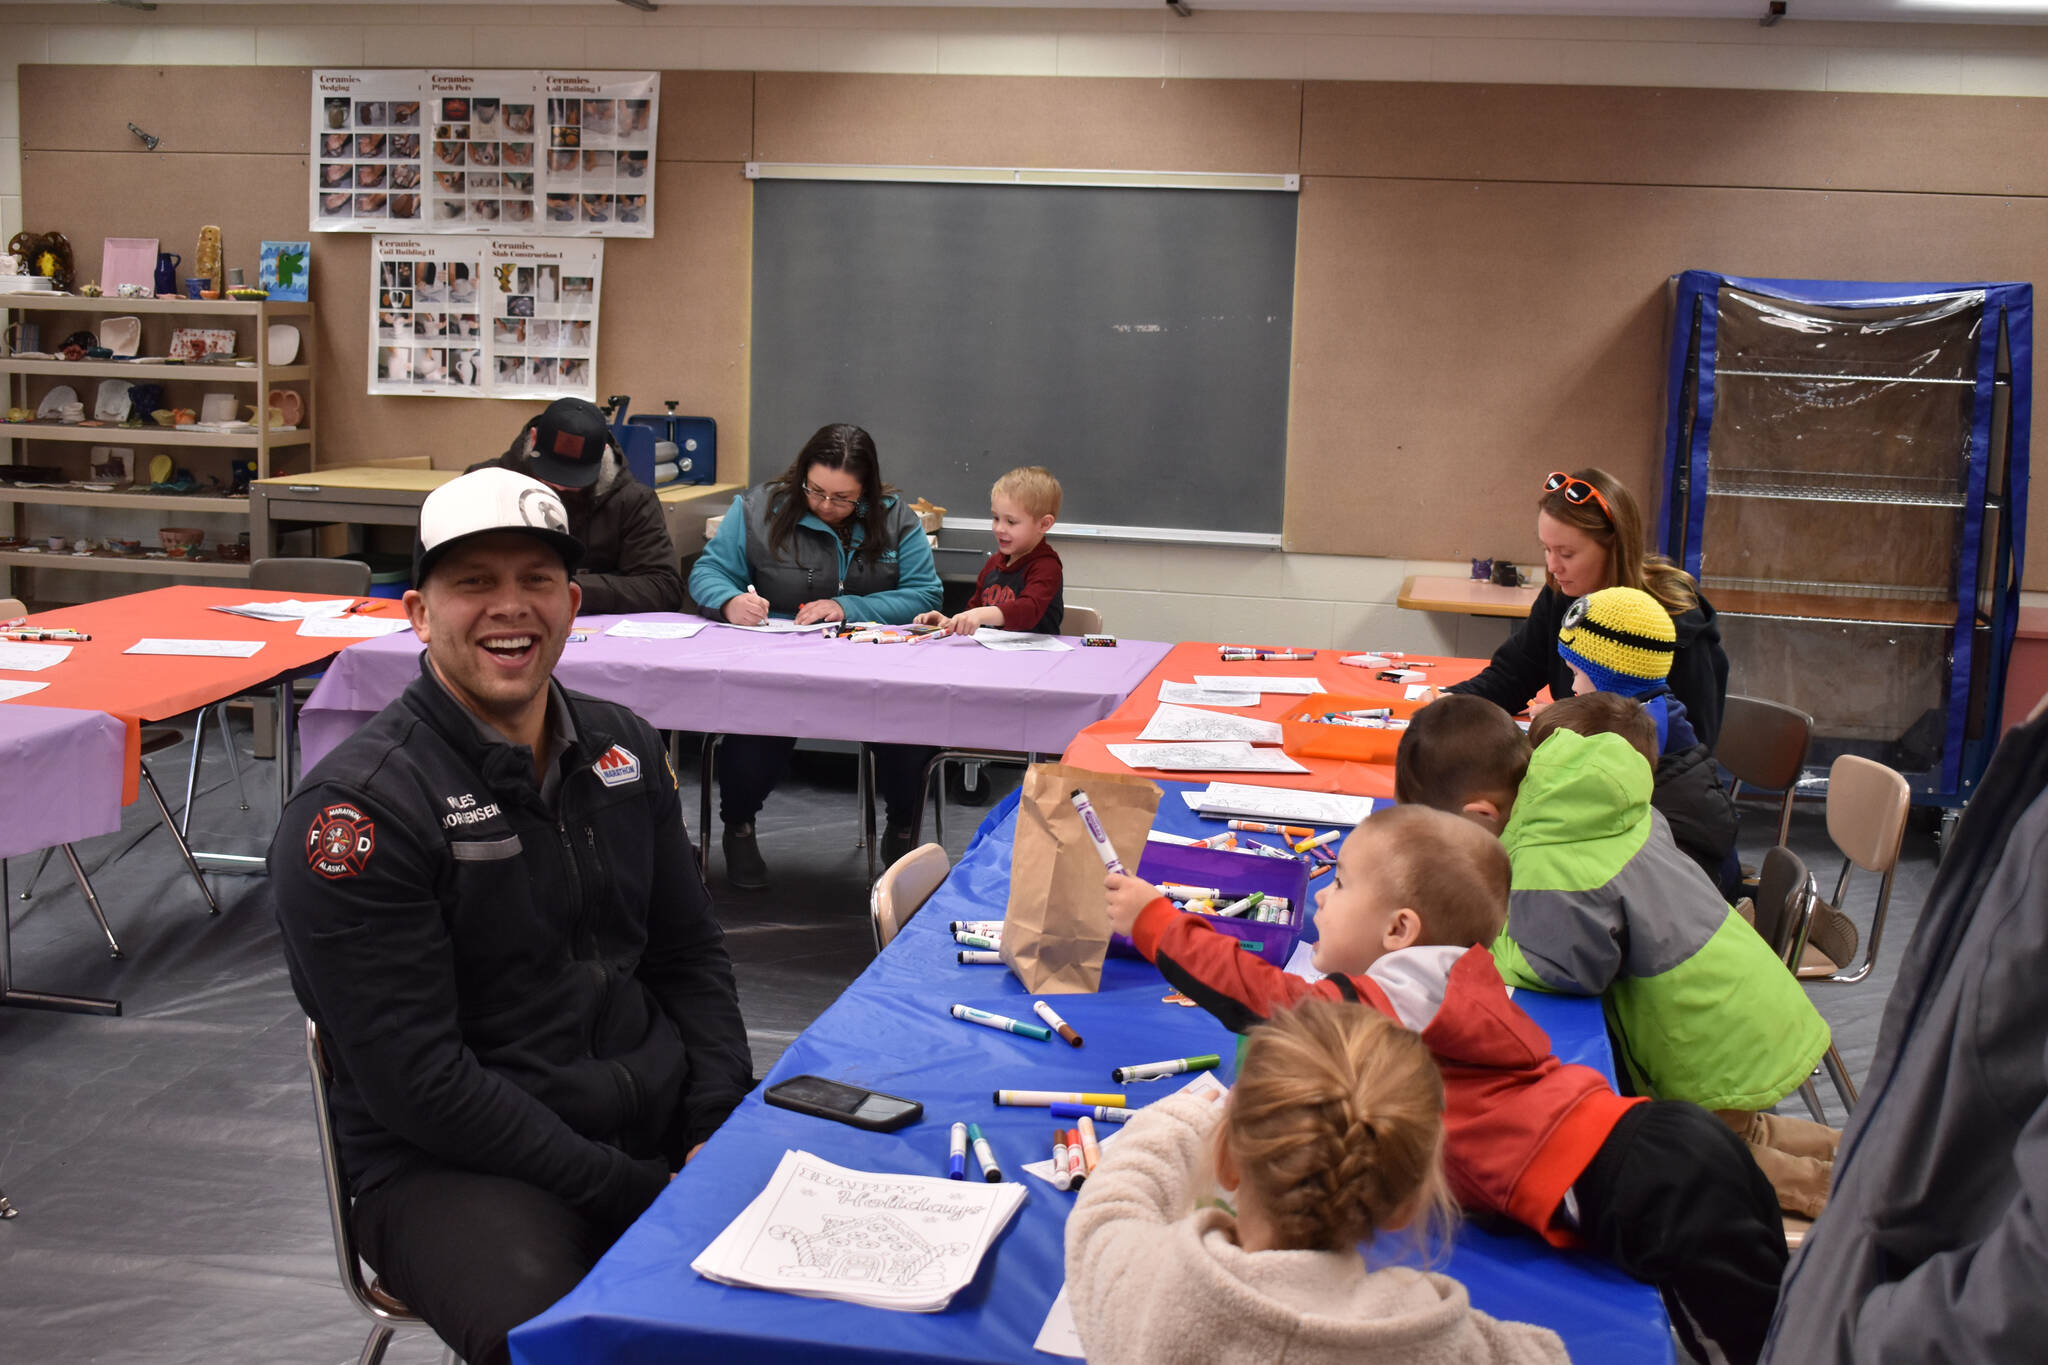 Children and parents color in one of the craft rooms, part of Christmas Comes to Nikiski festivities on Saturday, Dec. 3, 2022, at Nikiski Community Recreation Center in Nikiski, Alaska. (Jake Dye/Peninsula Clarion)